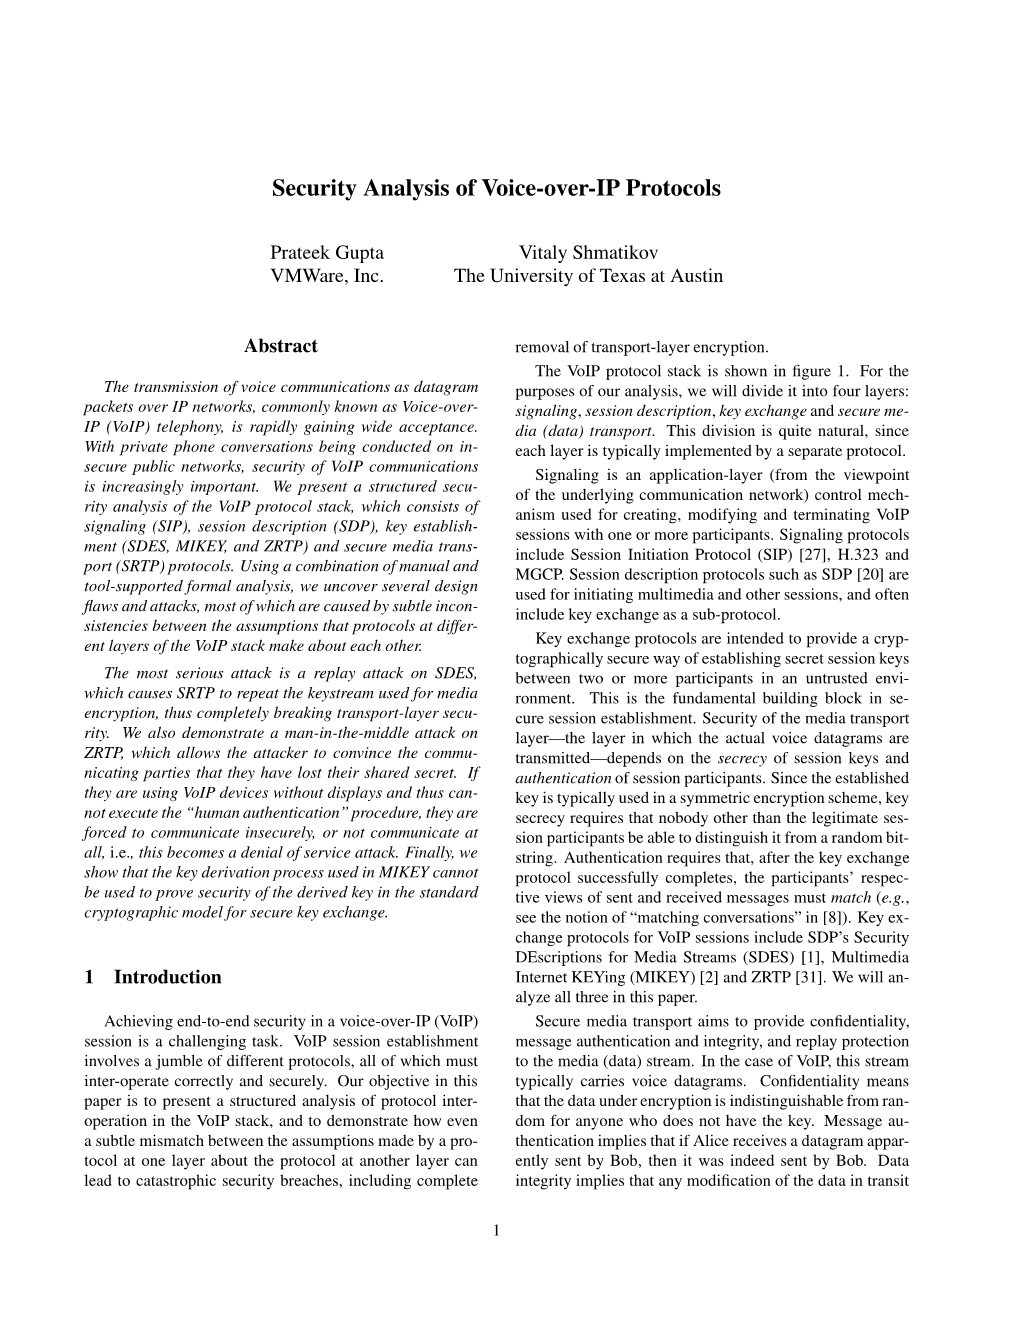 Security Analysis of Voice-Over-IP Protocols